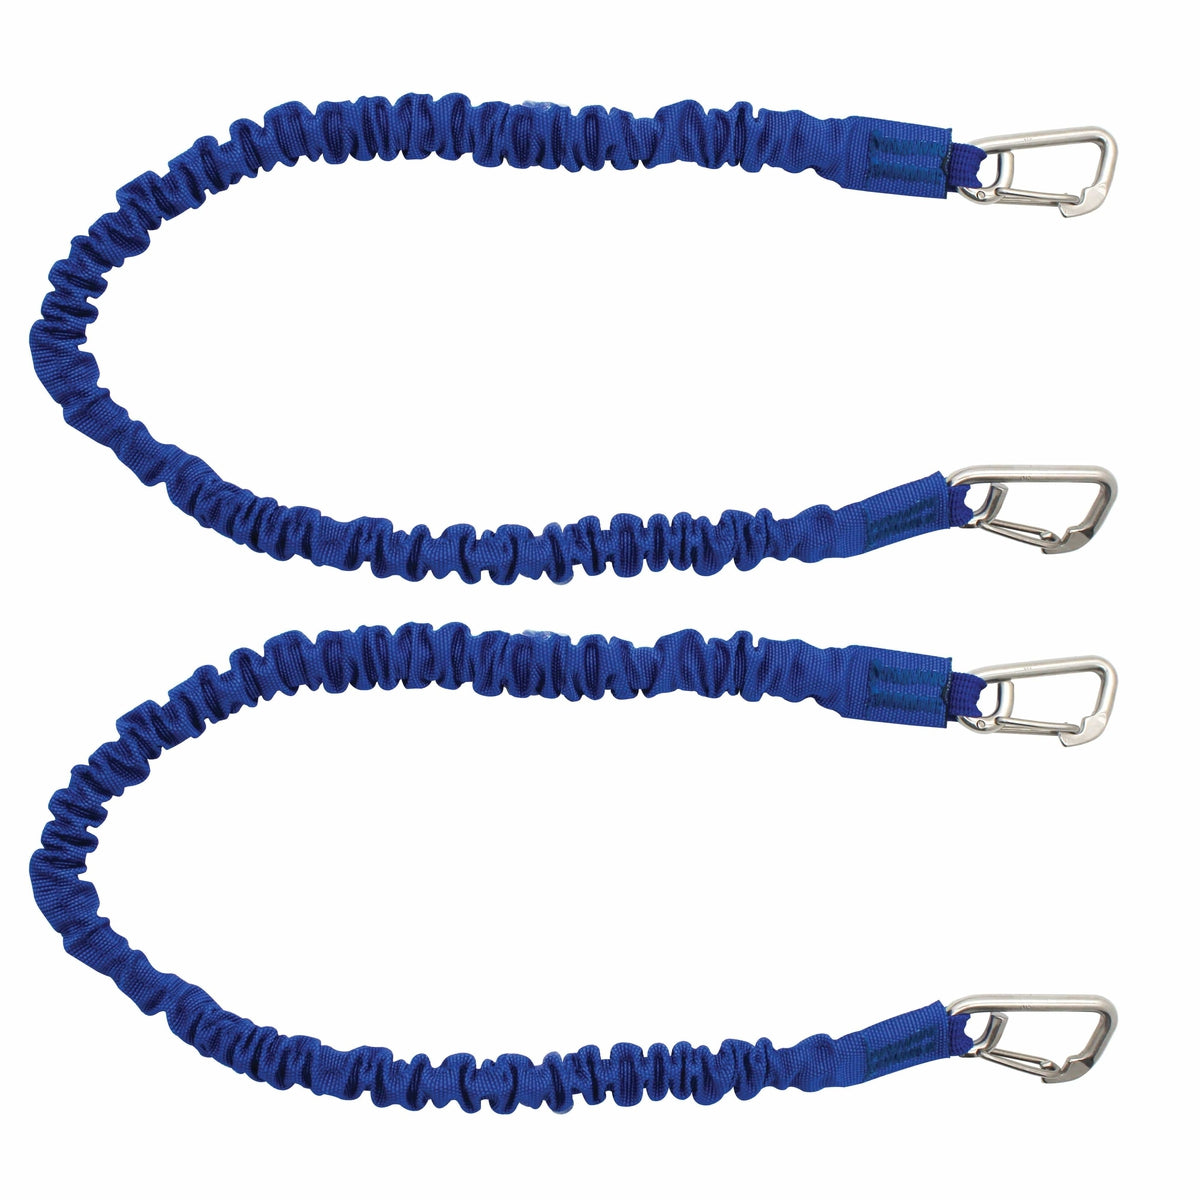 Extreme Max High-Strength Line Snubber 2-pk 36" Blue #3006.2789